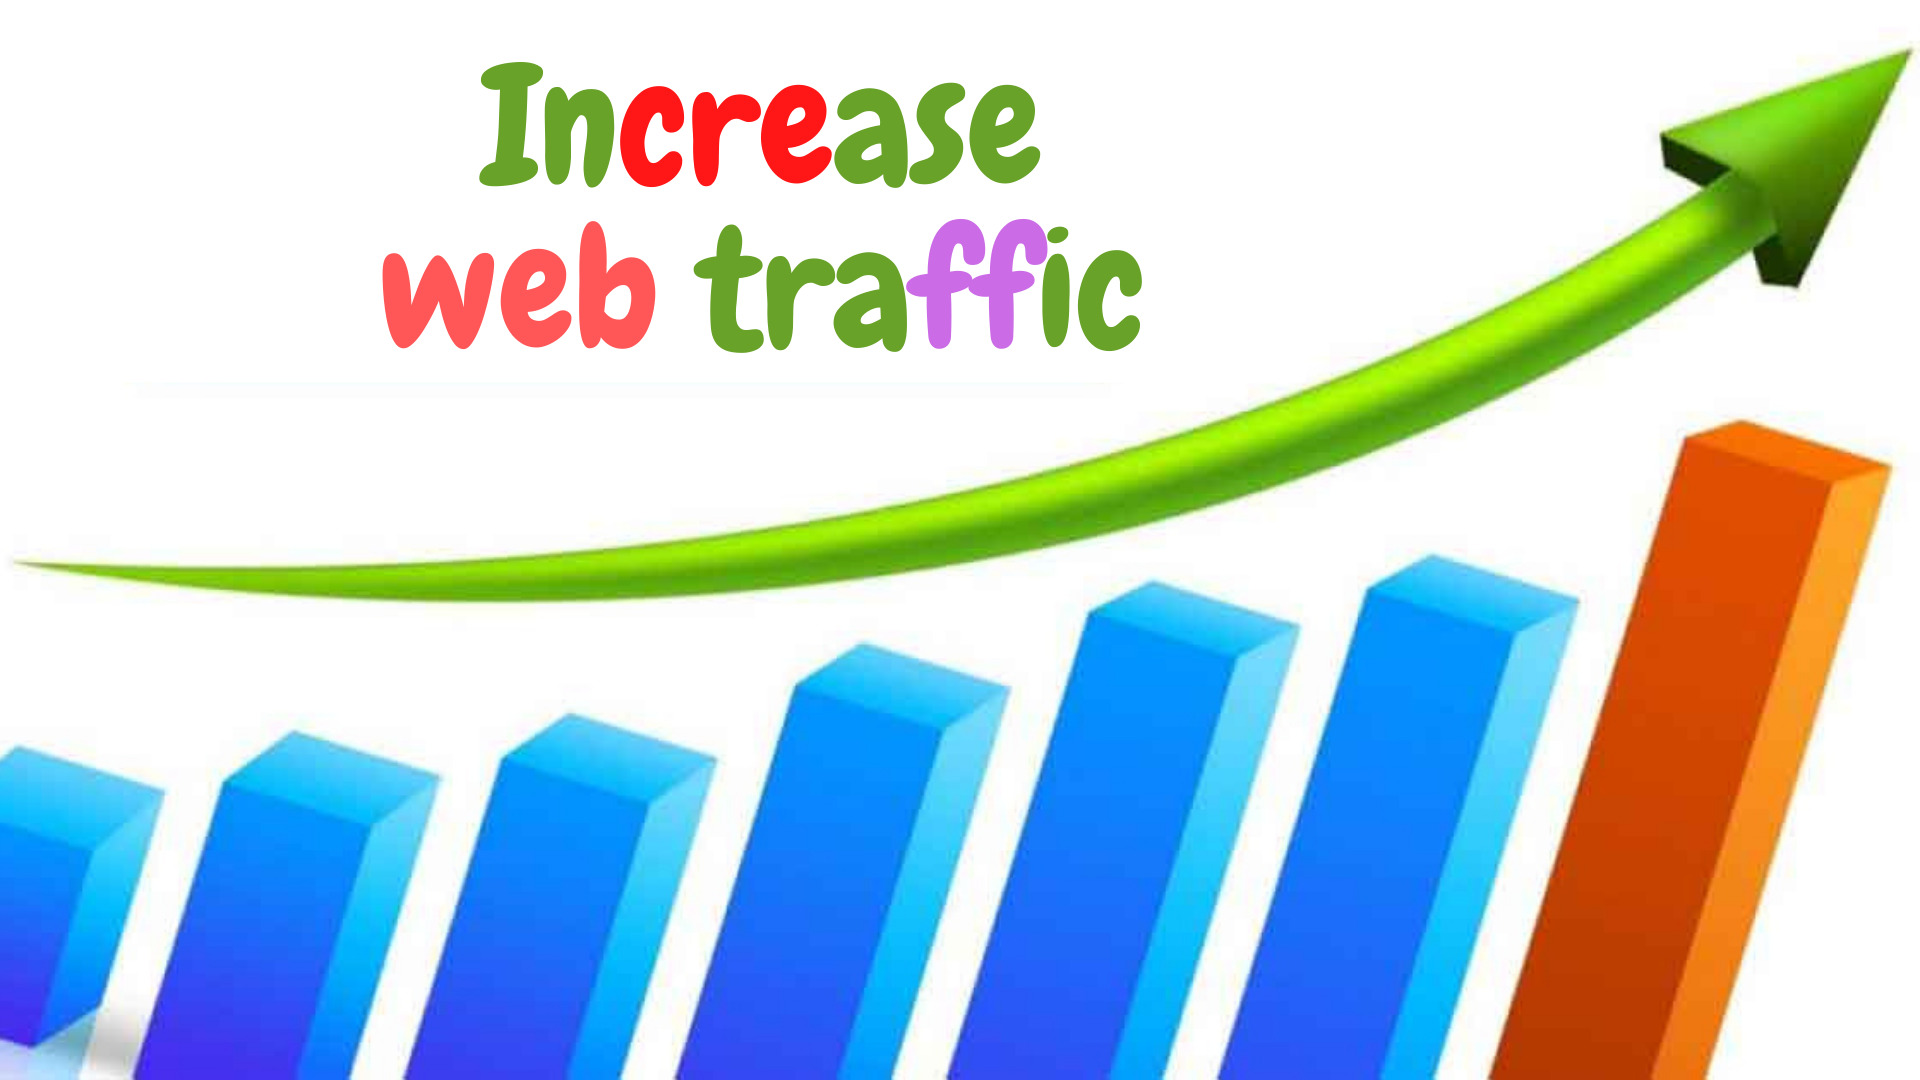 How to drive traffic to your website effectively?